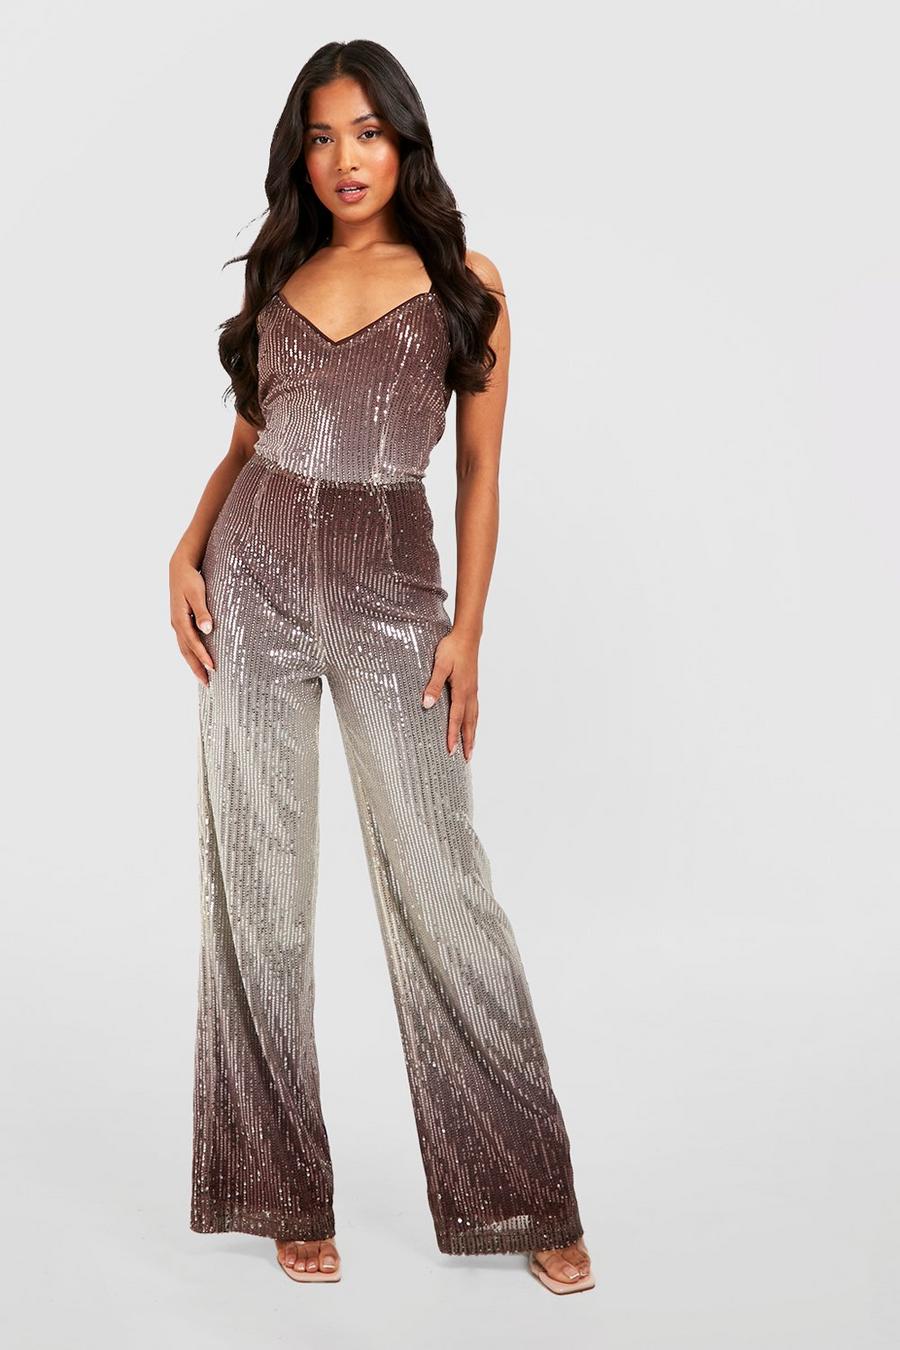 Chocolate brown Petite Flared Ombre Jumpsuit